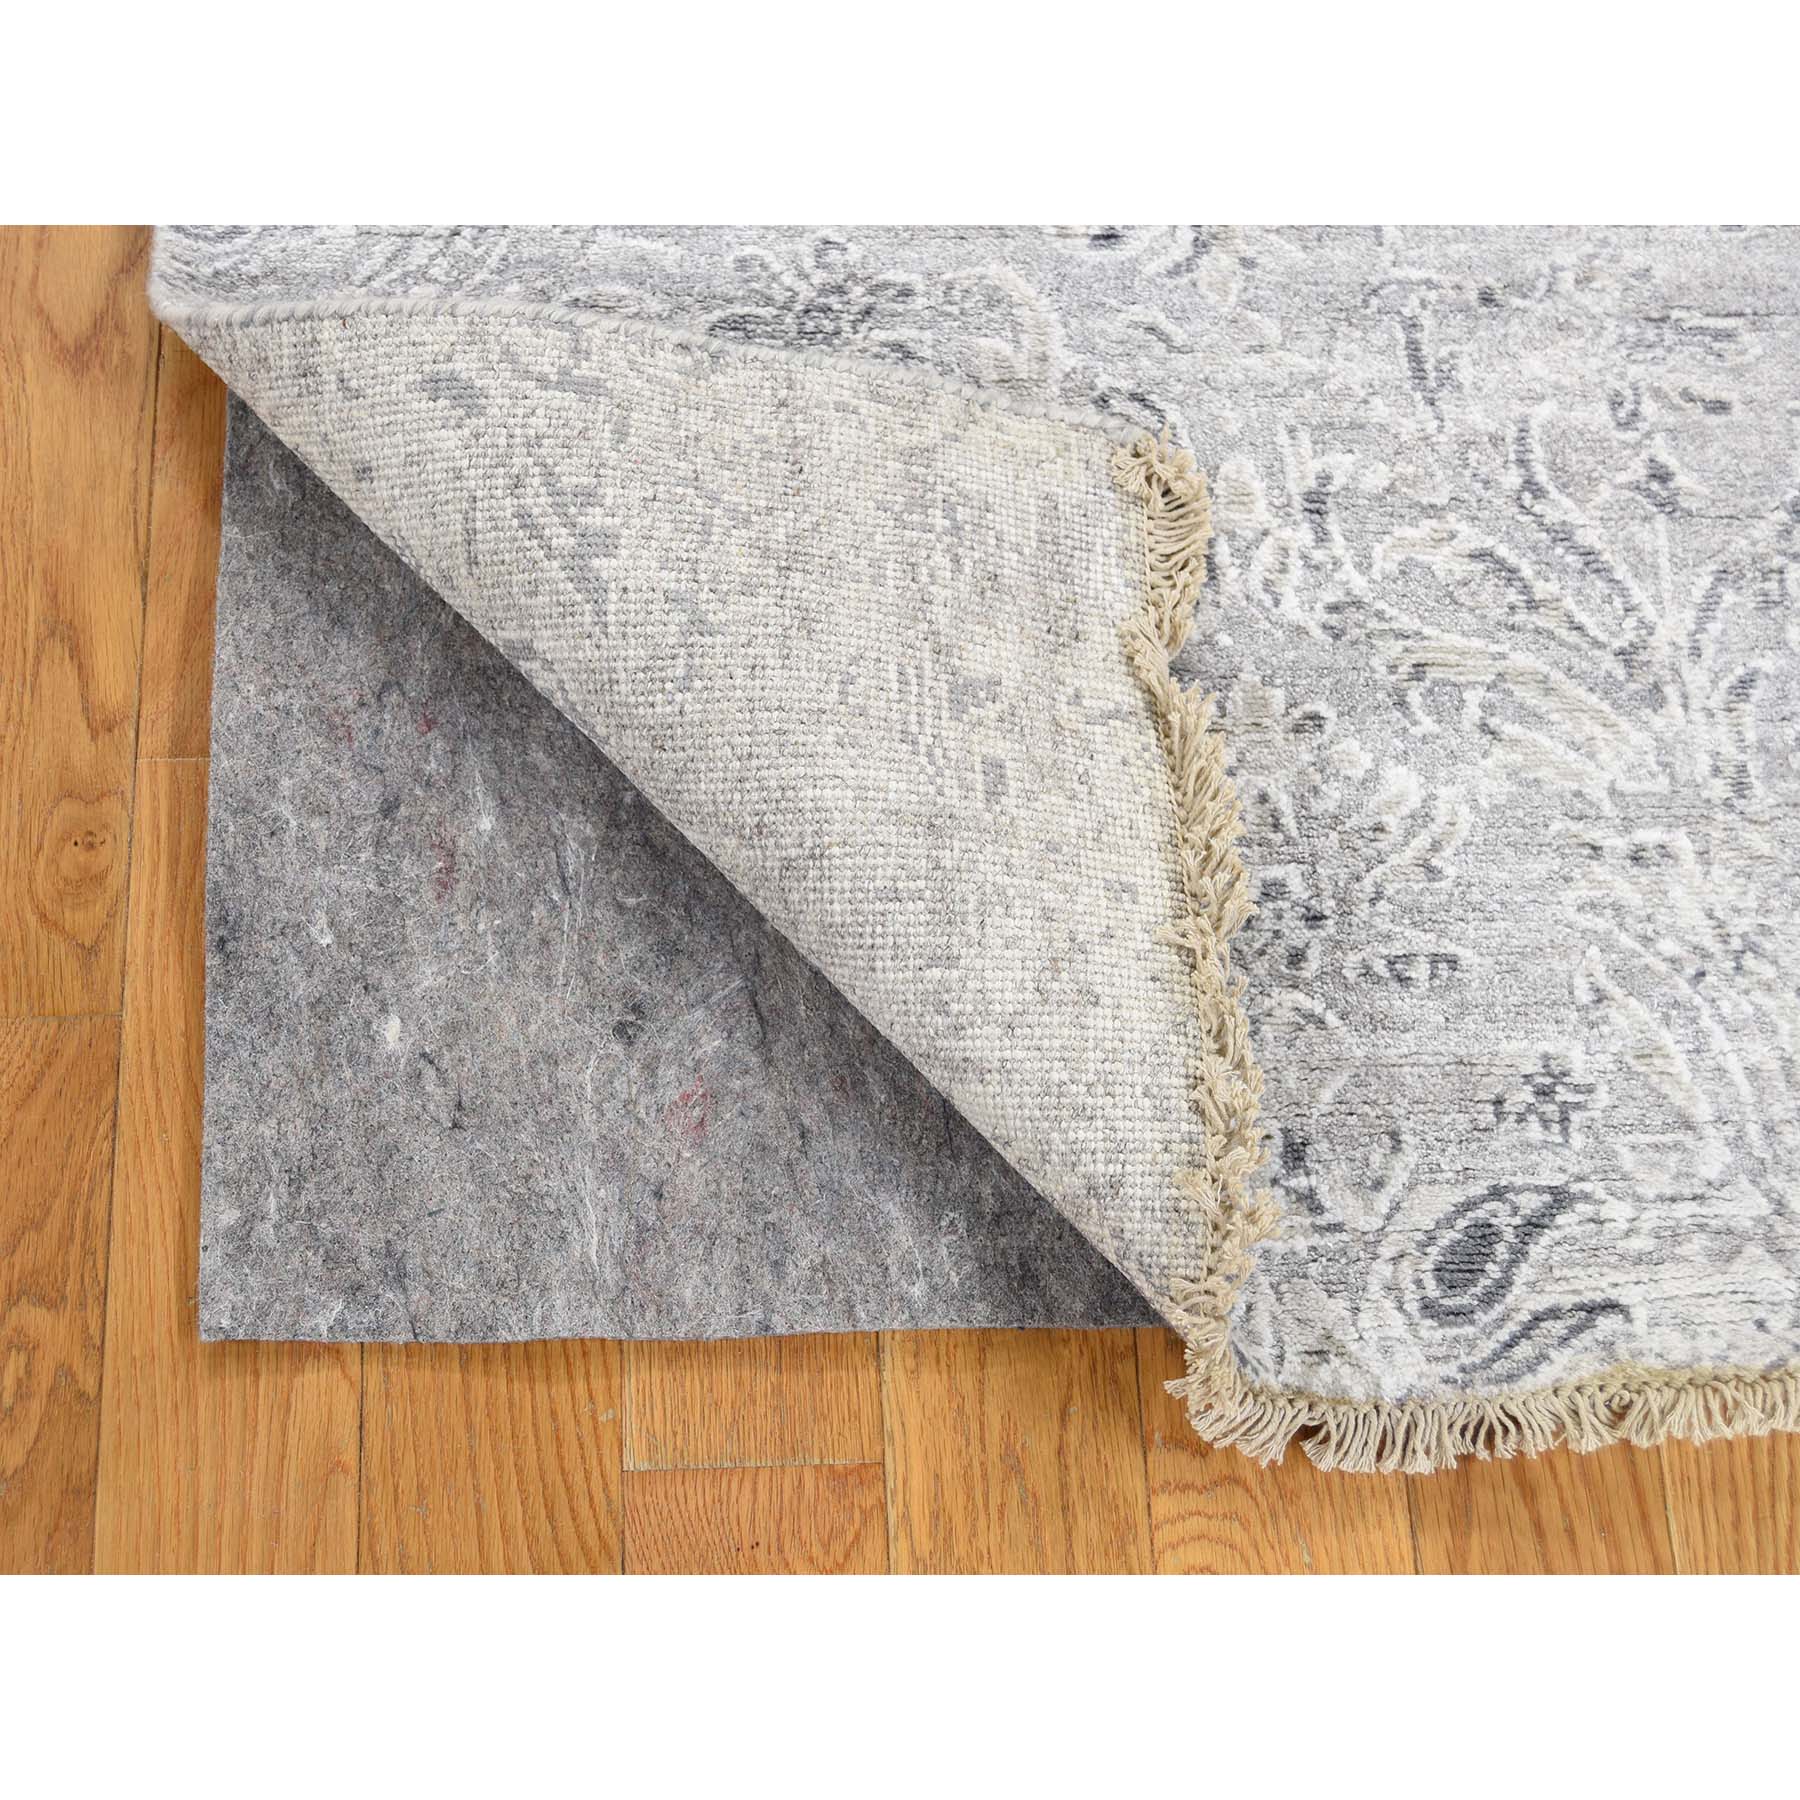 2-7 x5-10  Hand-Knotted Damask Tone On Tone Wool and Silk Hi-Lo Pile Runner Oriental Rug 